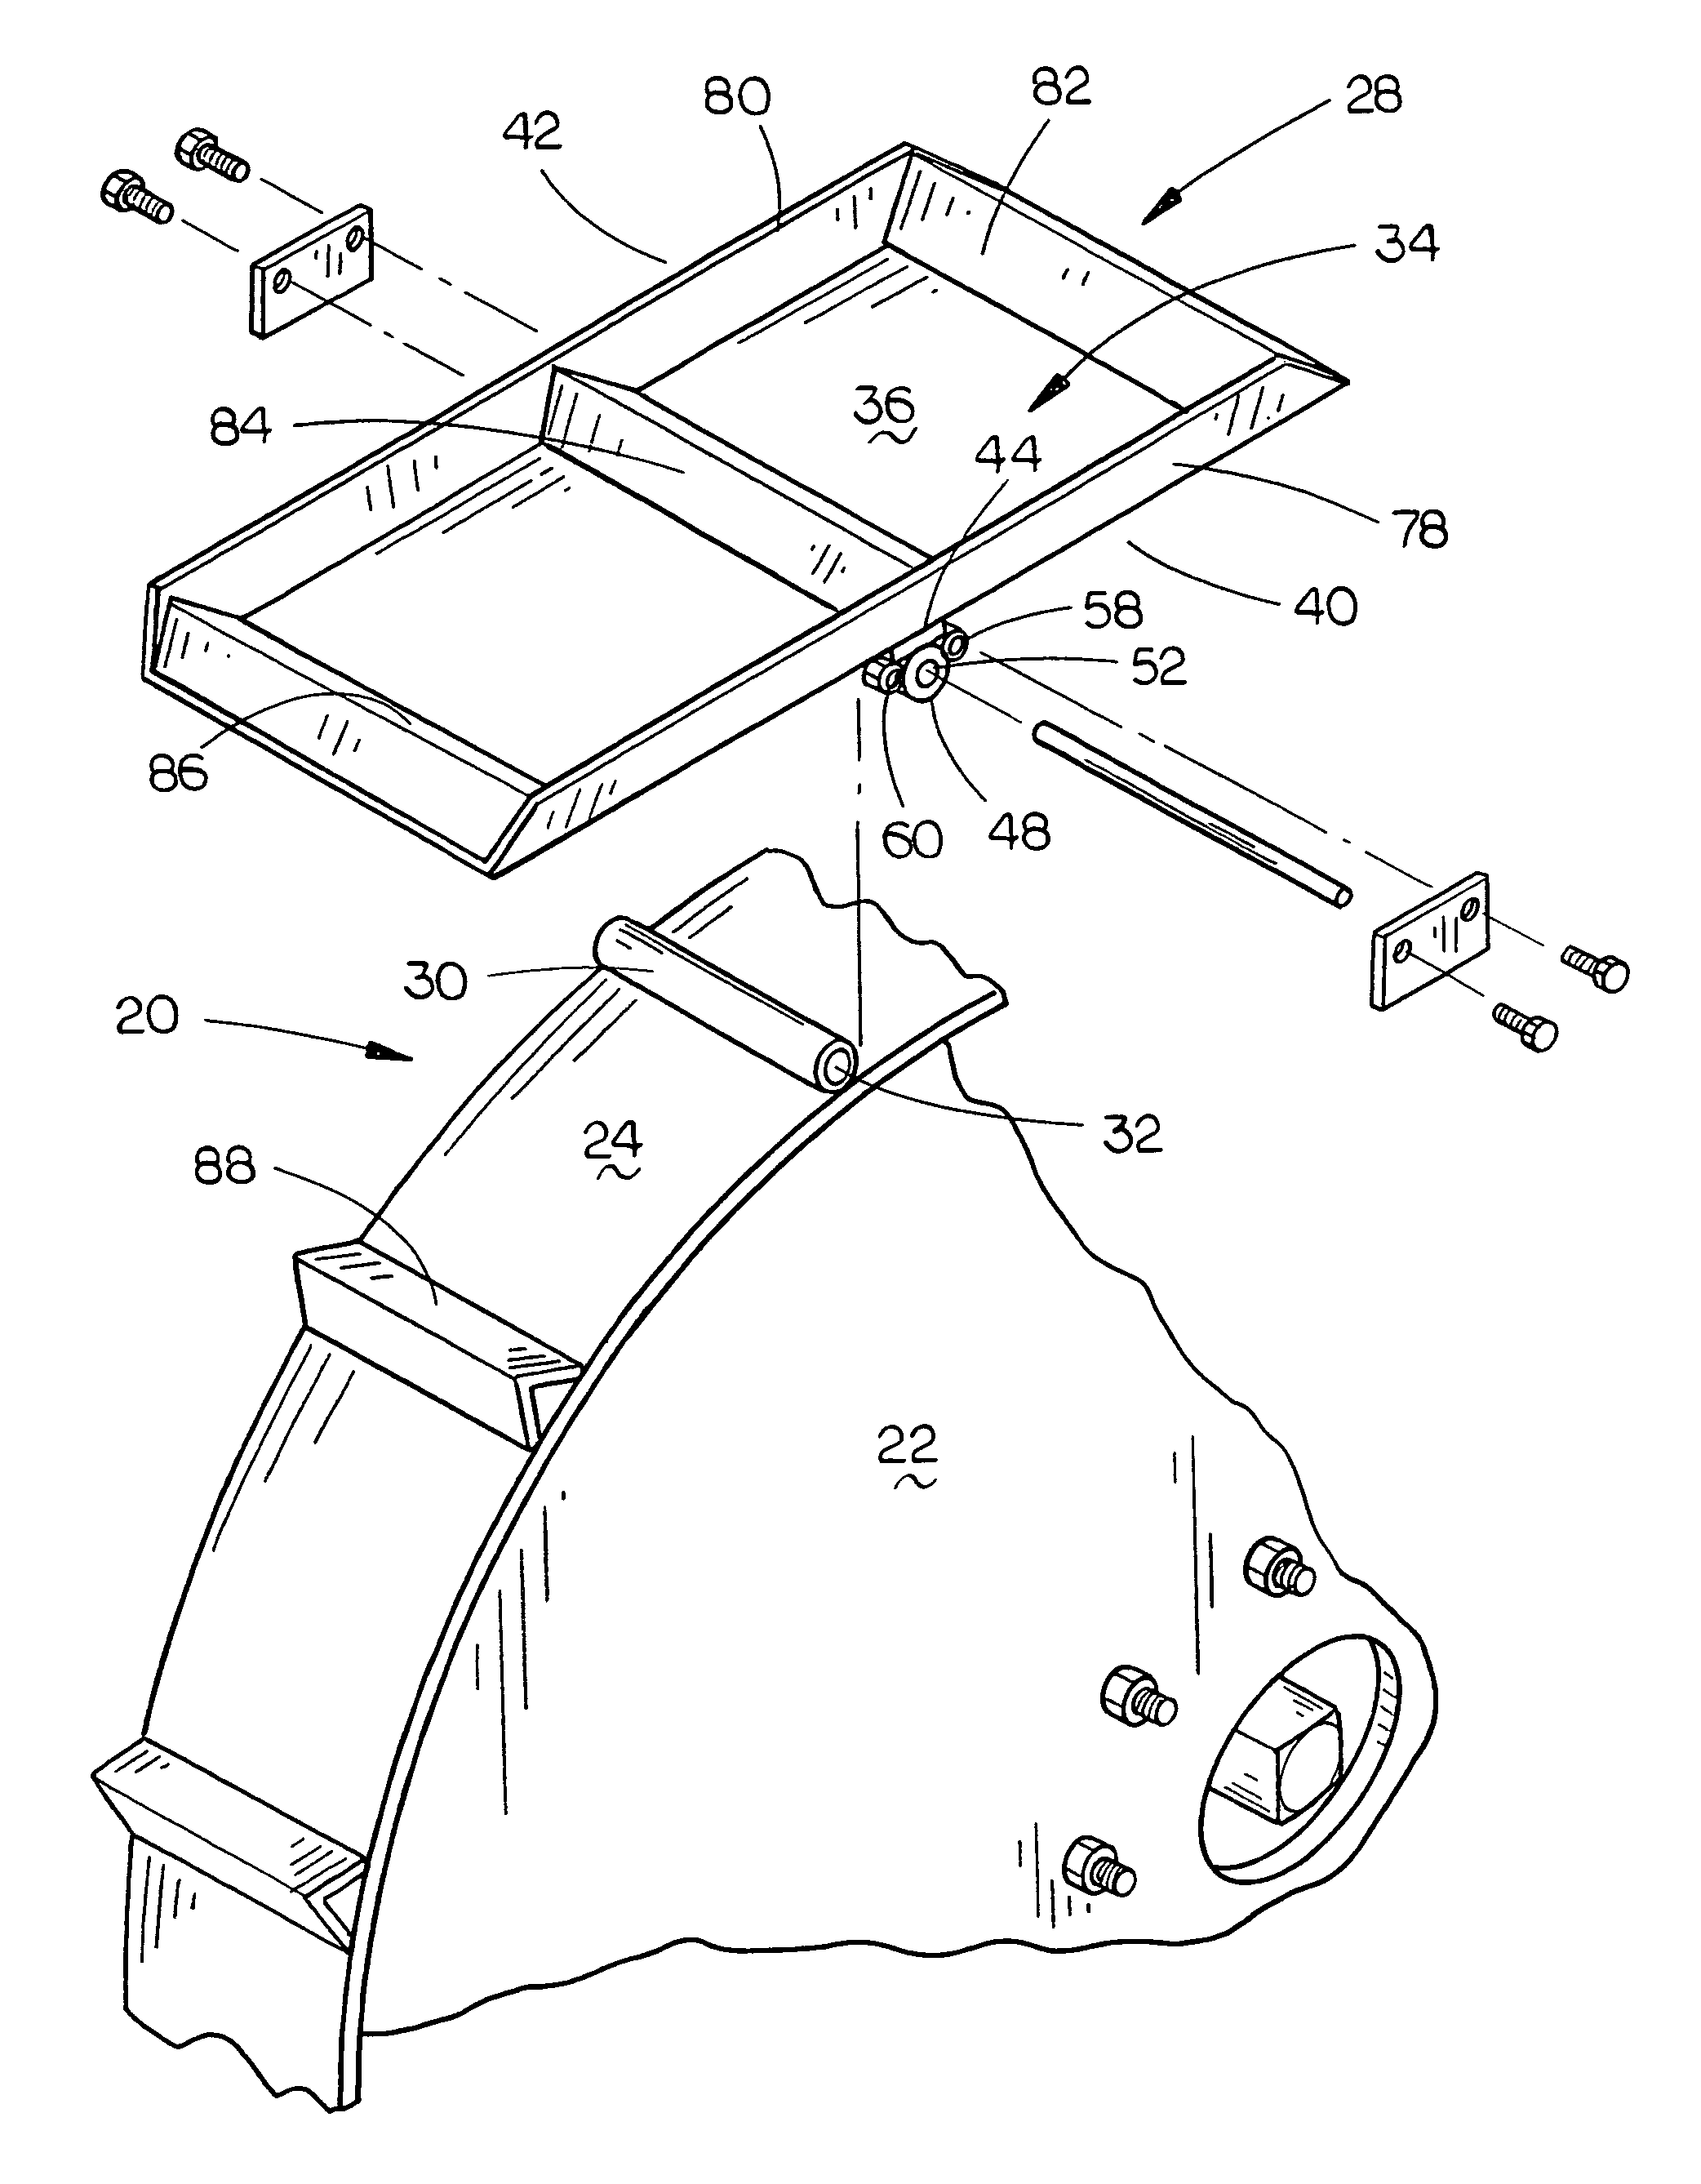 Flotation drive wheel for a self-propelled irrigation system